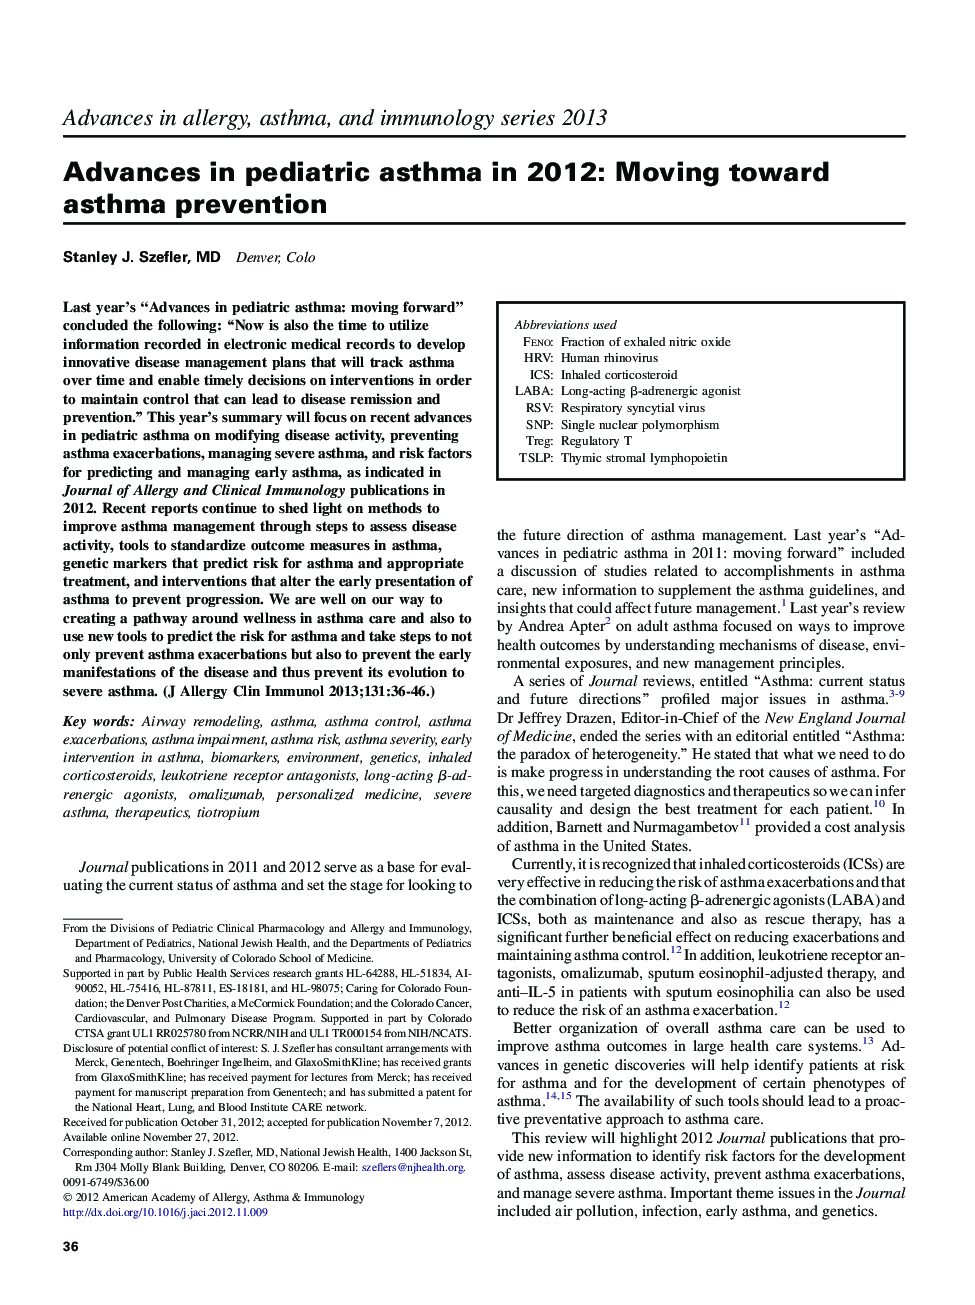 Advances in pediatric asthma in 2012: Moving toward asthma prevention